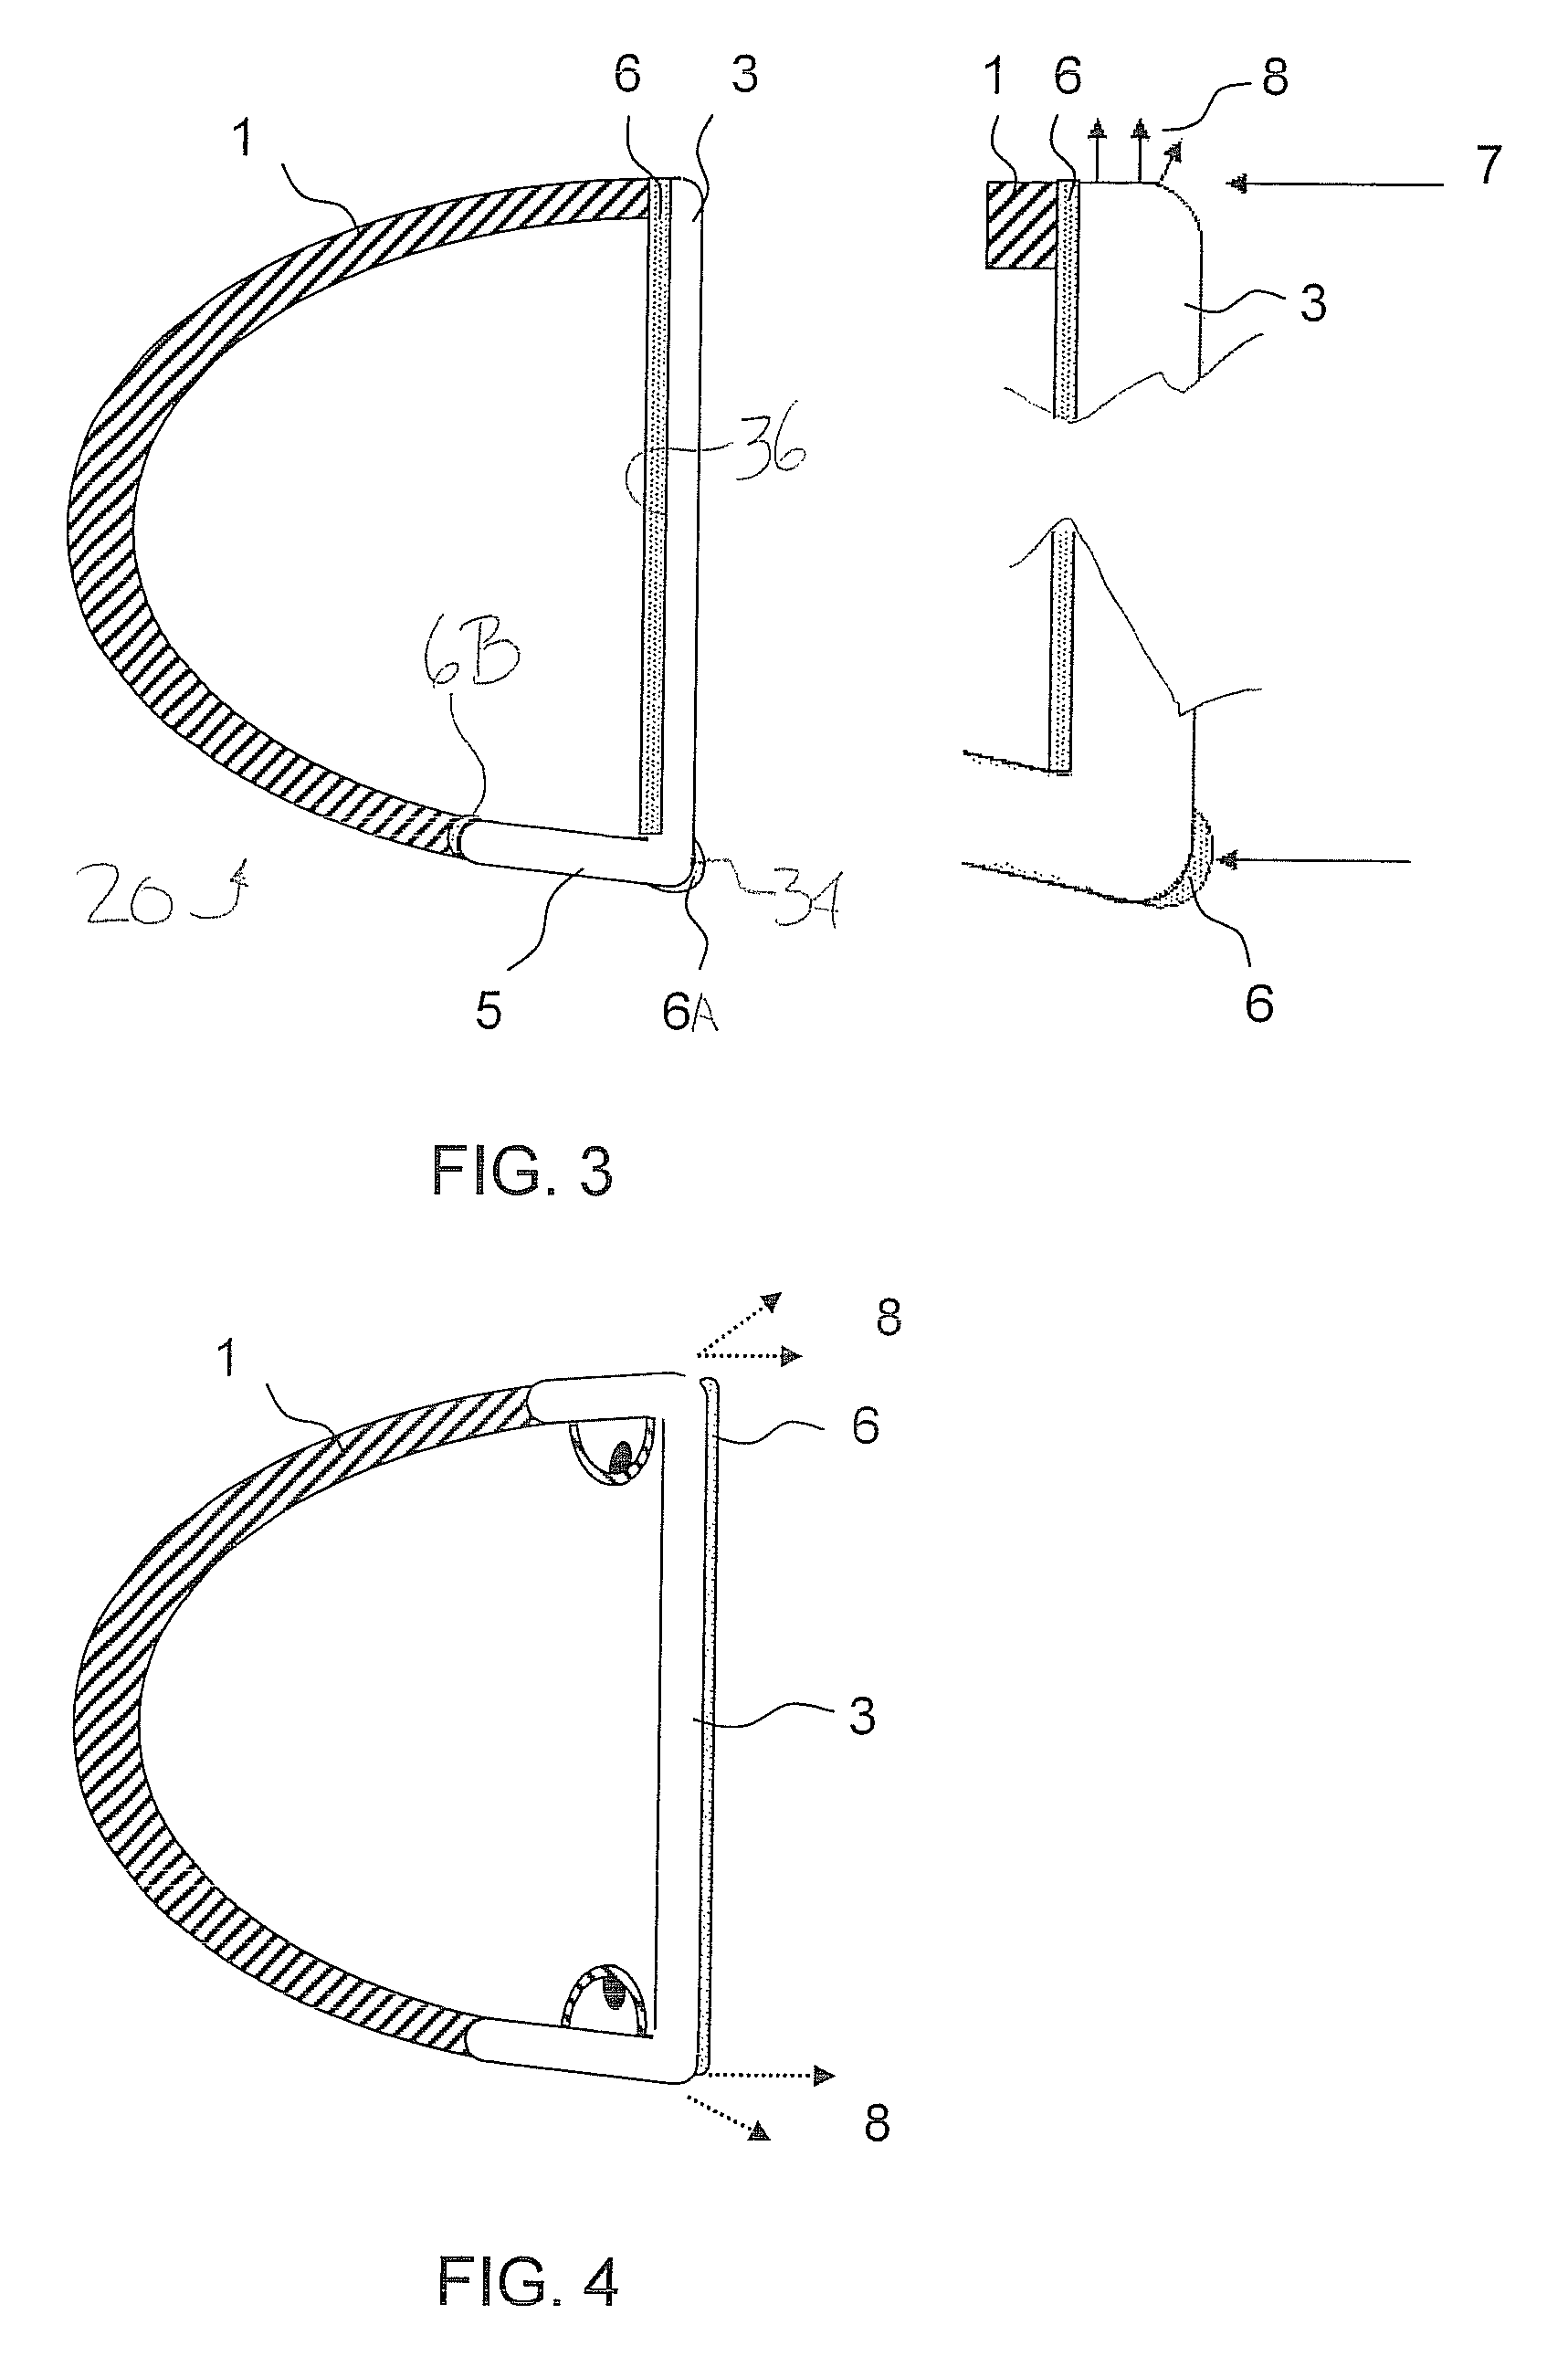 Interior rear view mirror assembly with plastic substrate and illumination